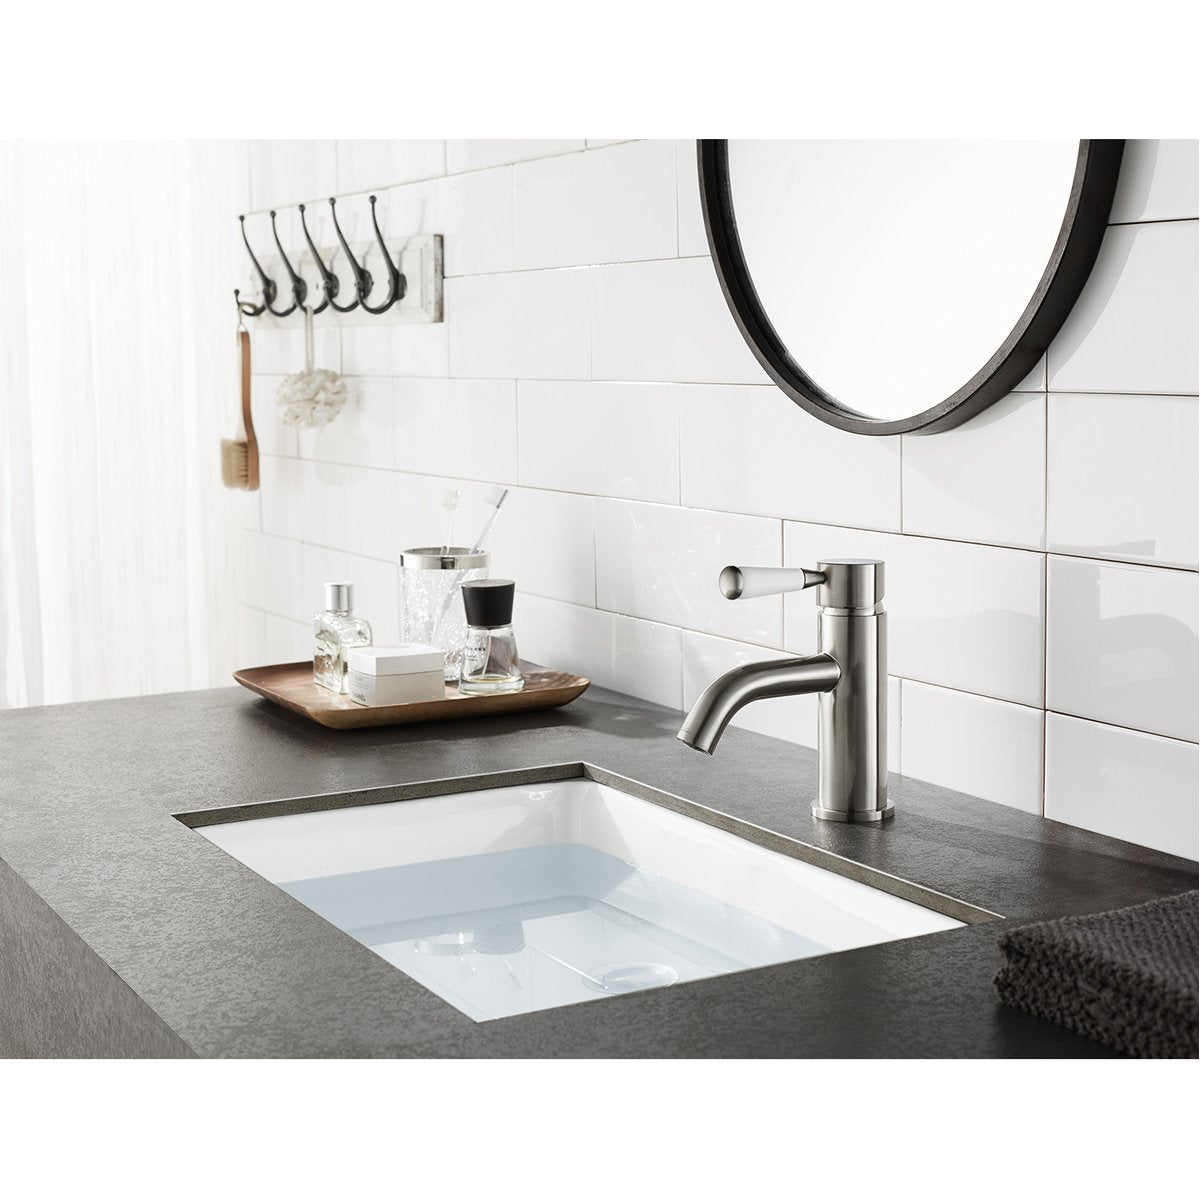 Kingston Brass Fauceture Paris Single-Handle Bathroom Faucet with Drain and Deck Plate